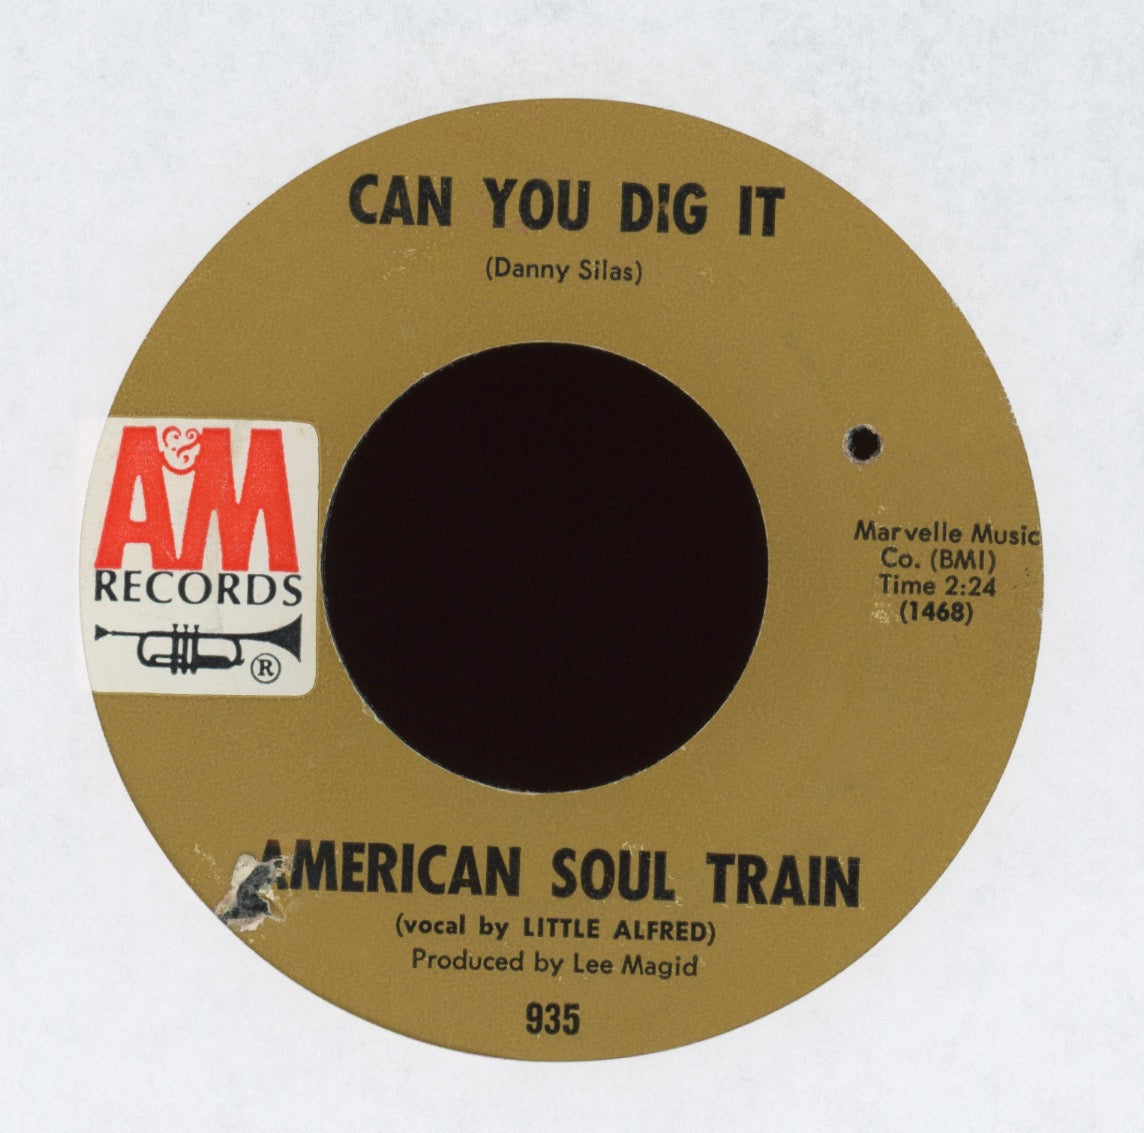 American Soul Train - Can You Dig It on A&M Northern Soul 45